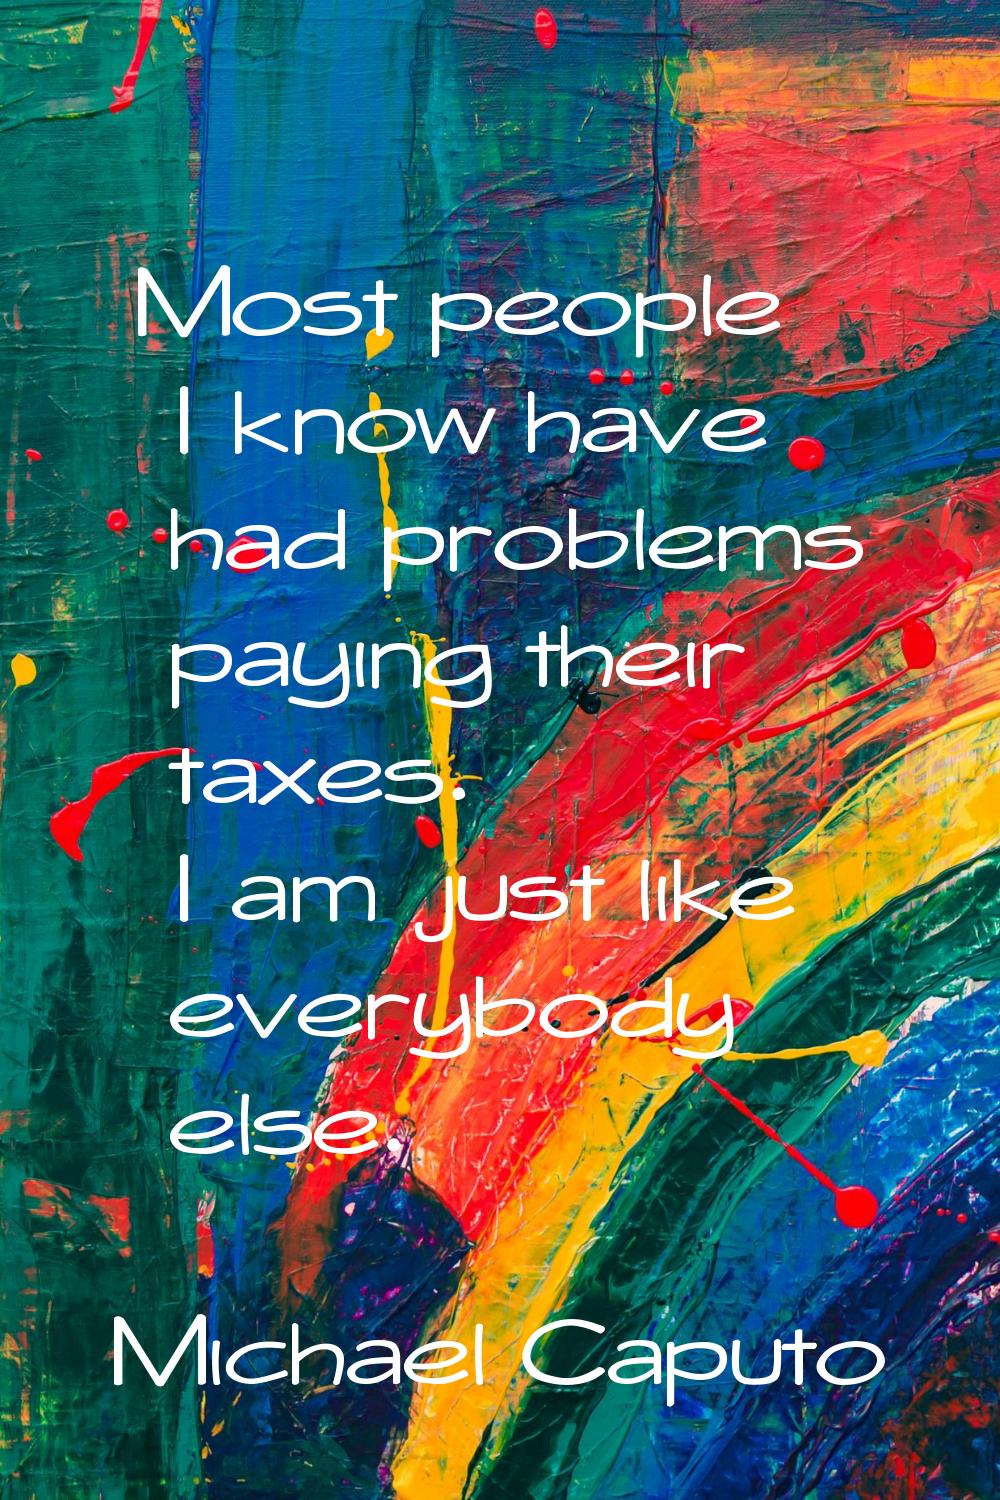 Most people I know have had problems paying their taxes. I am just like everybody else.